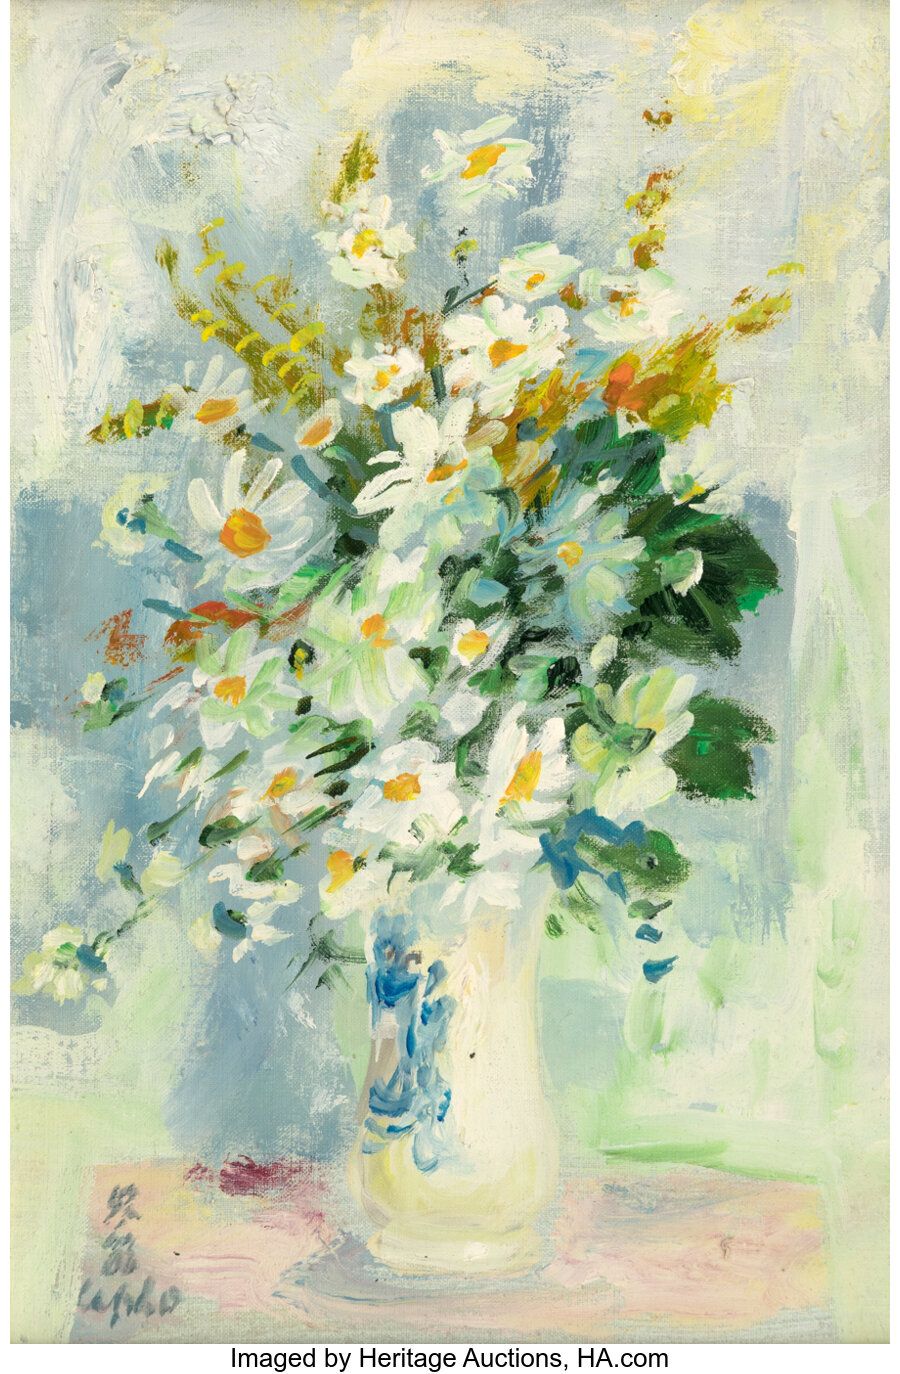 Le Pho (French/Vietnamese, 1907-2001) Fleurs Oil on canvas 13-1/4 x 8-3/4 inches&hellip;